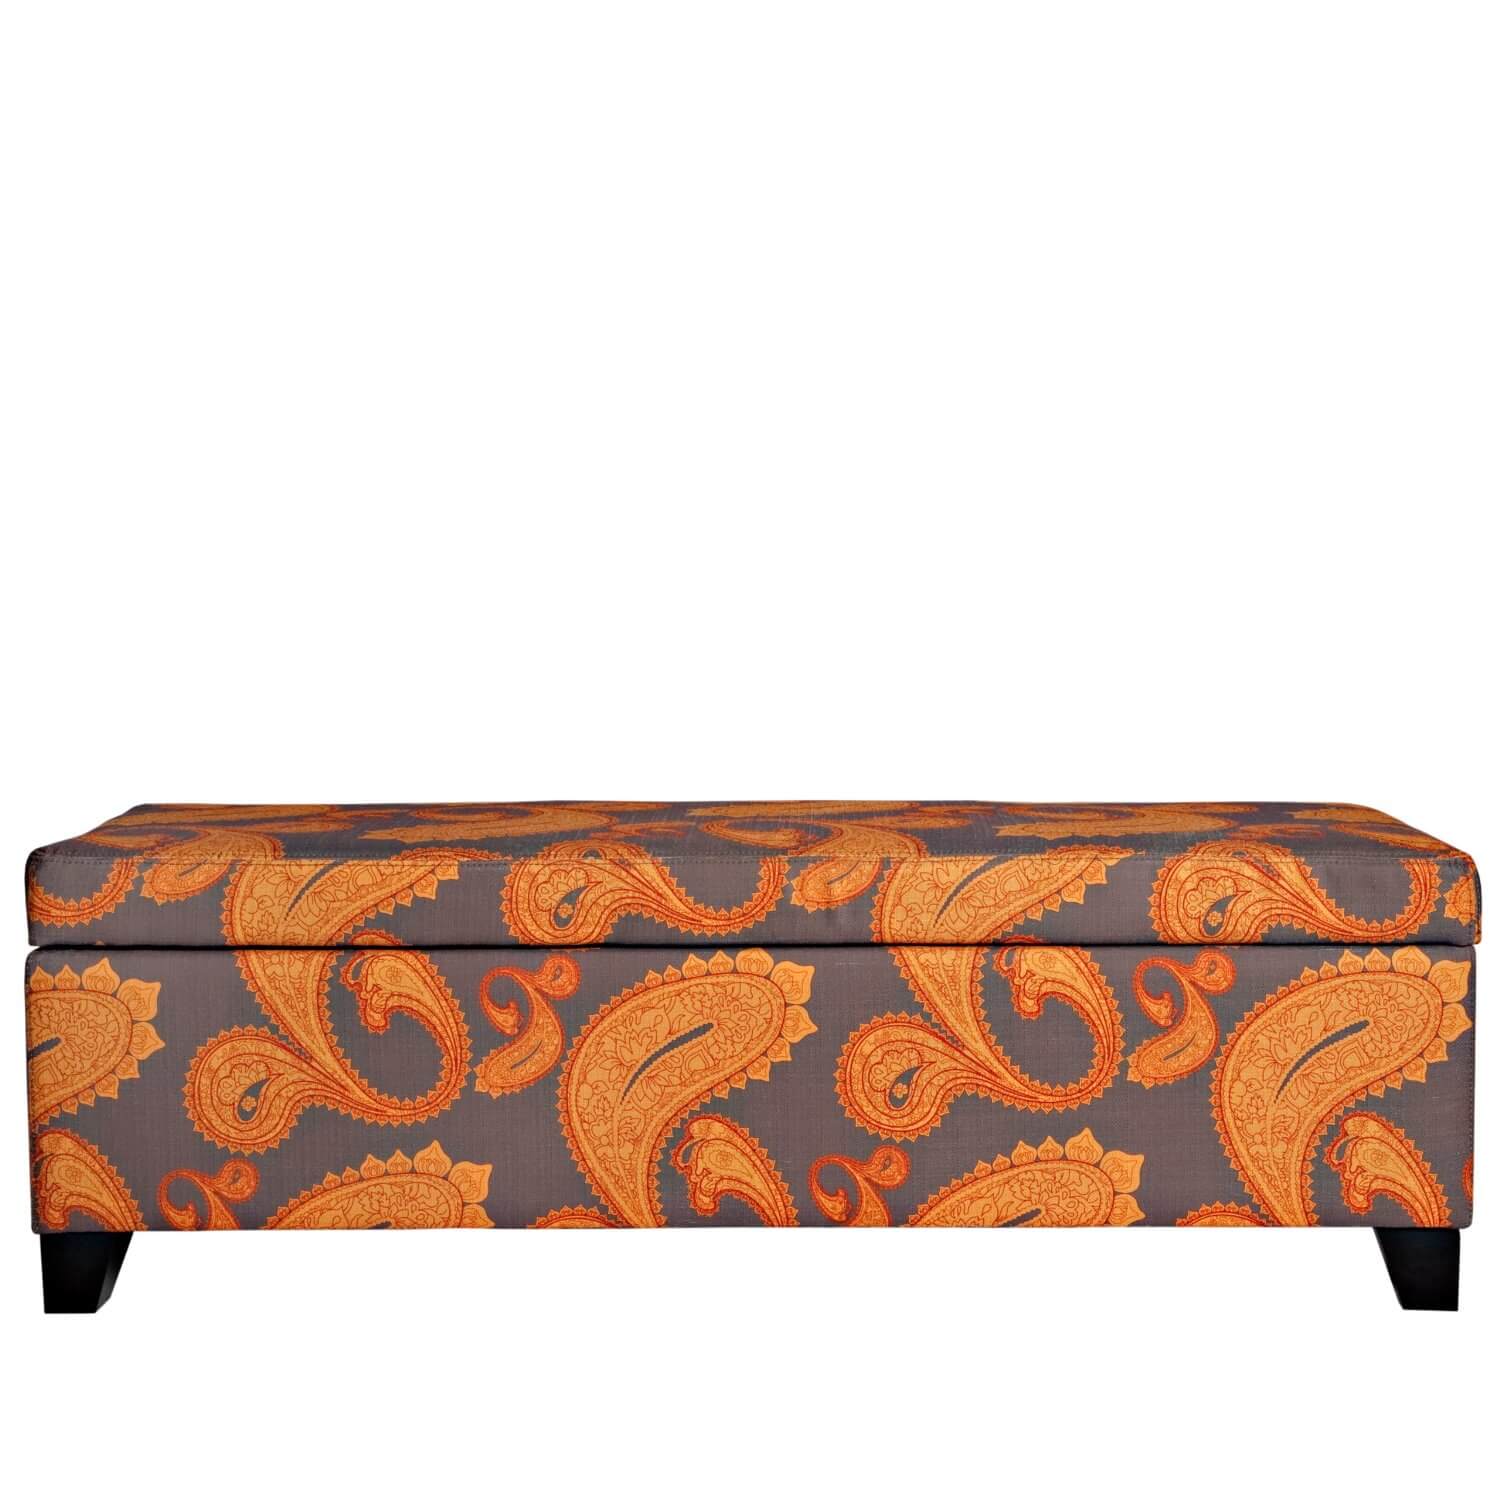 15 minute cleanup products, orange and brown storage trunk